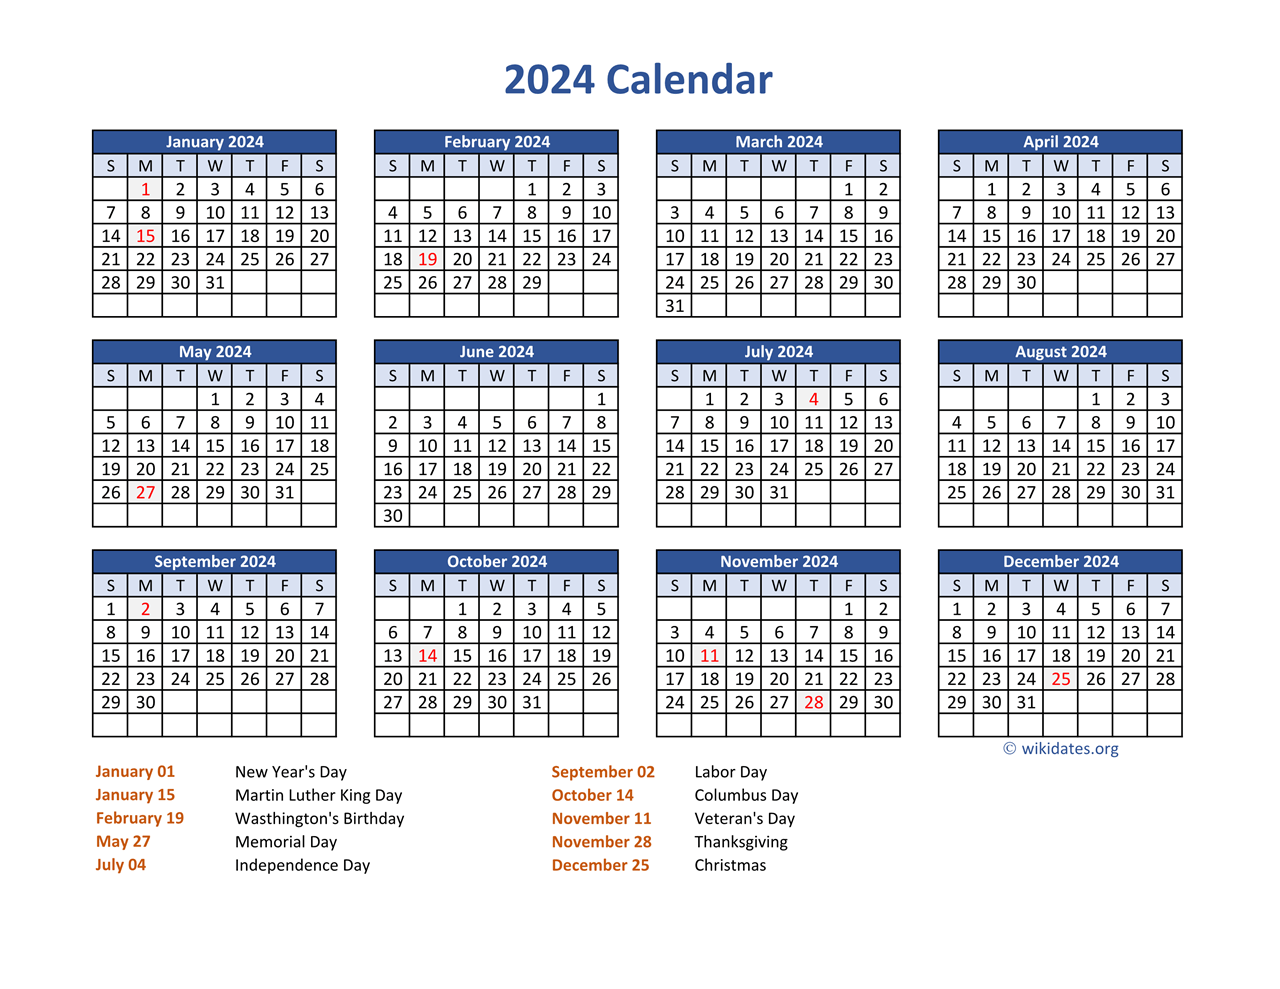 Pdf Calendar 2024 With Federal Holidays | Wikidates for Printable 2024 Calendar With Holidays Free